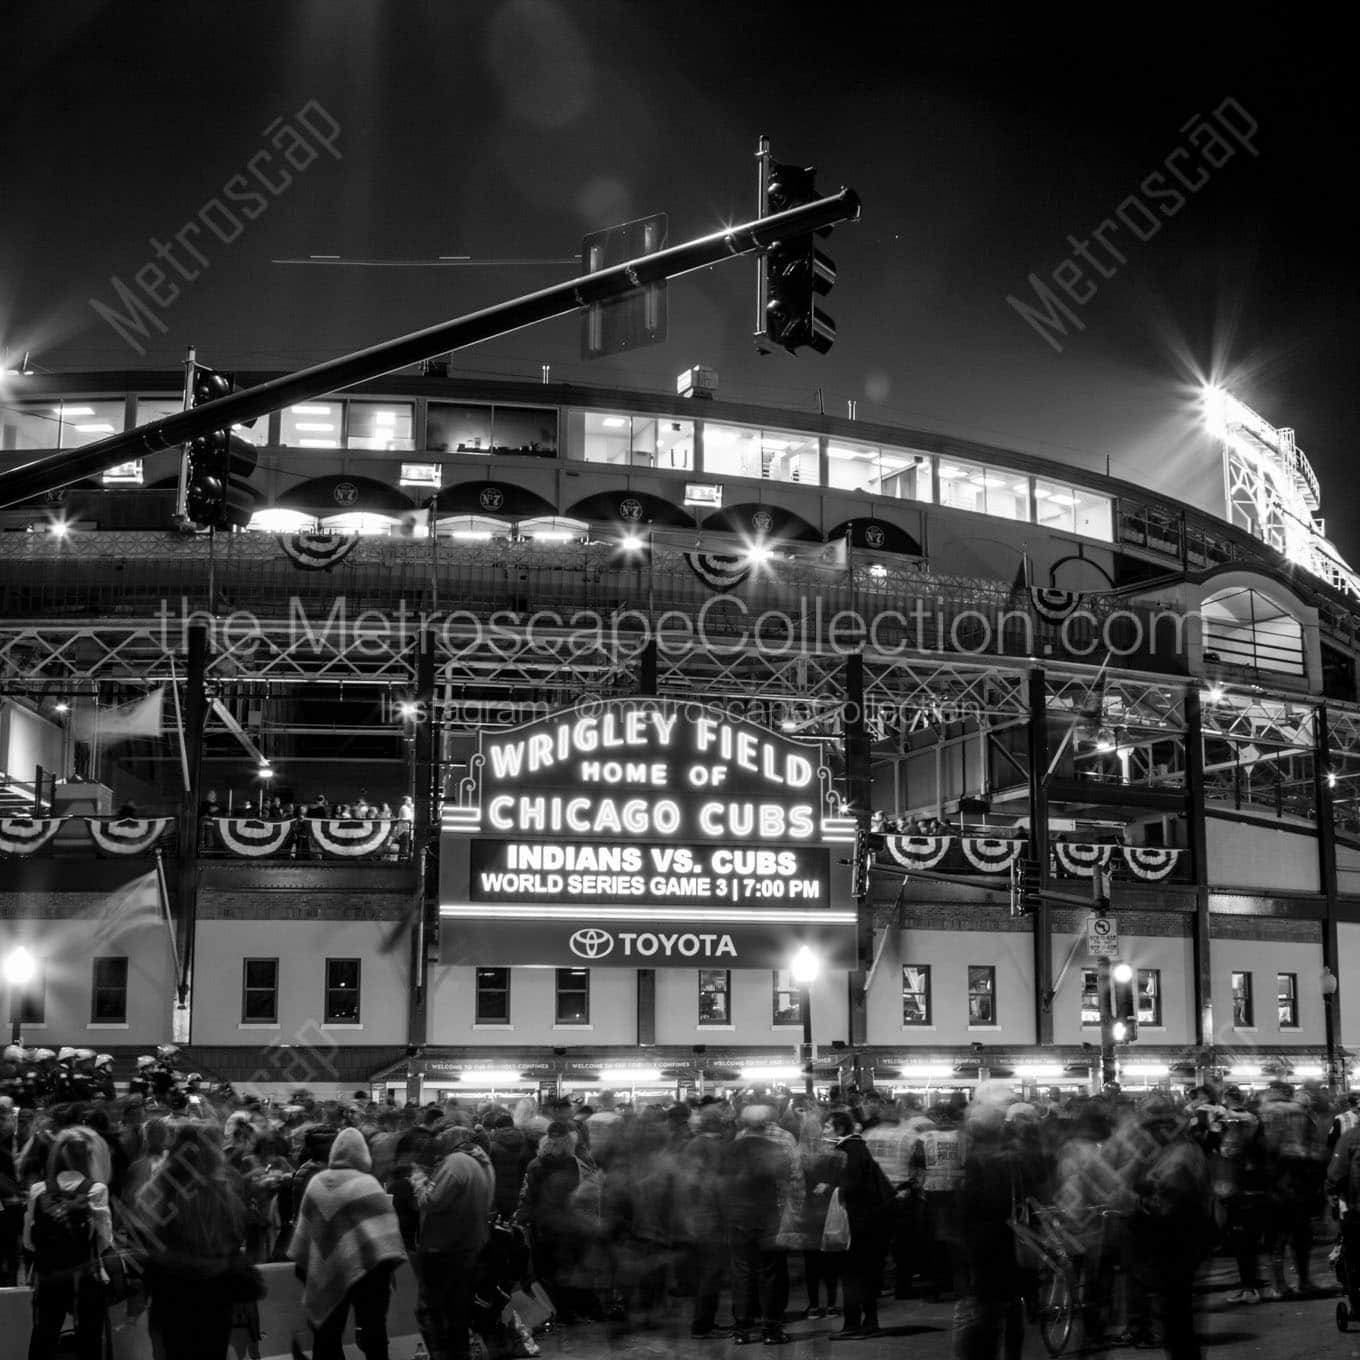 first world series game at wrigley field in 71 years Black & White Office Art